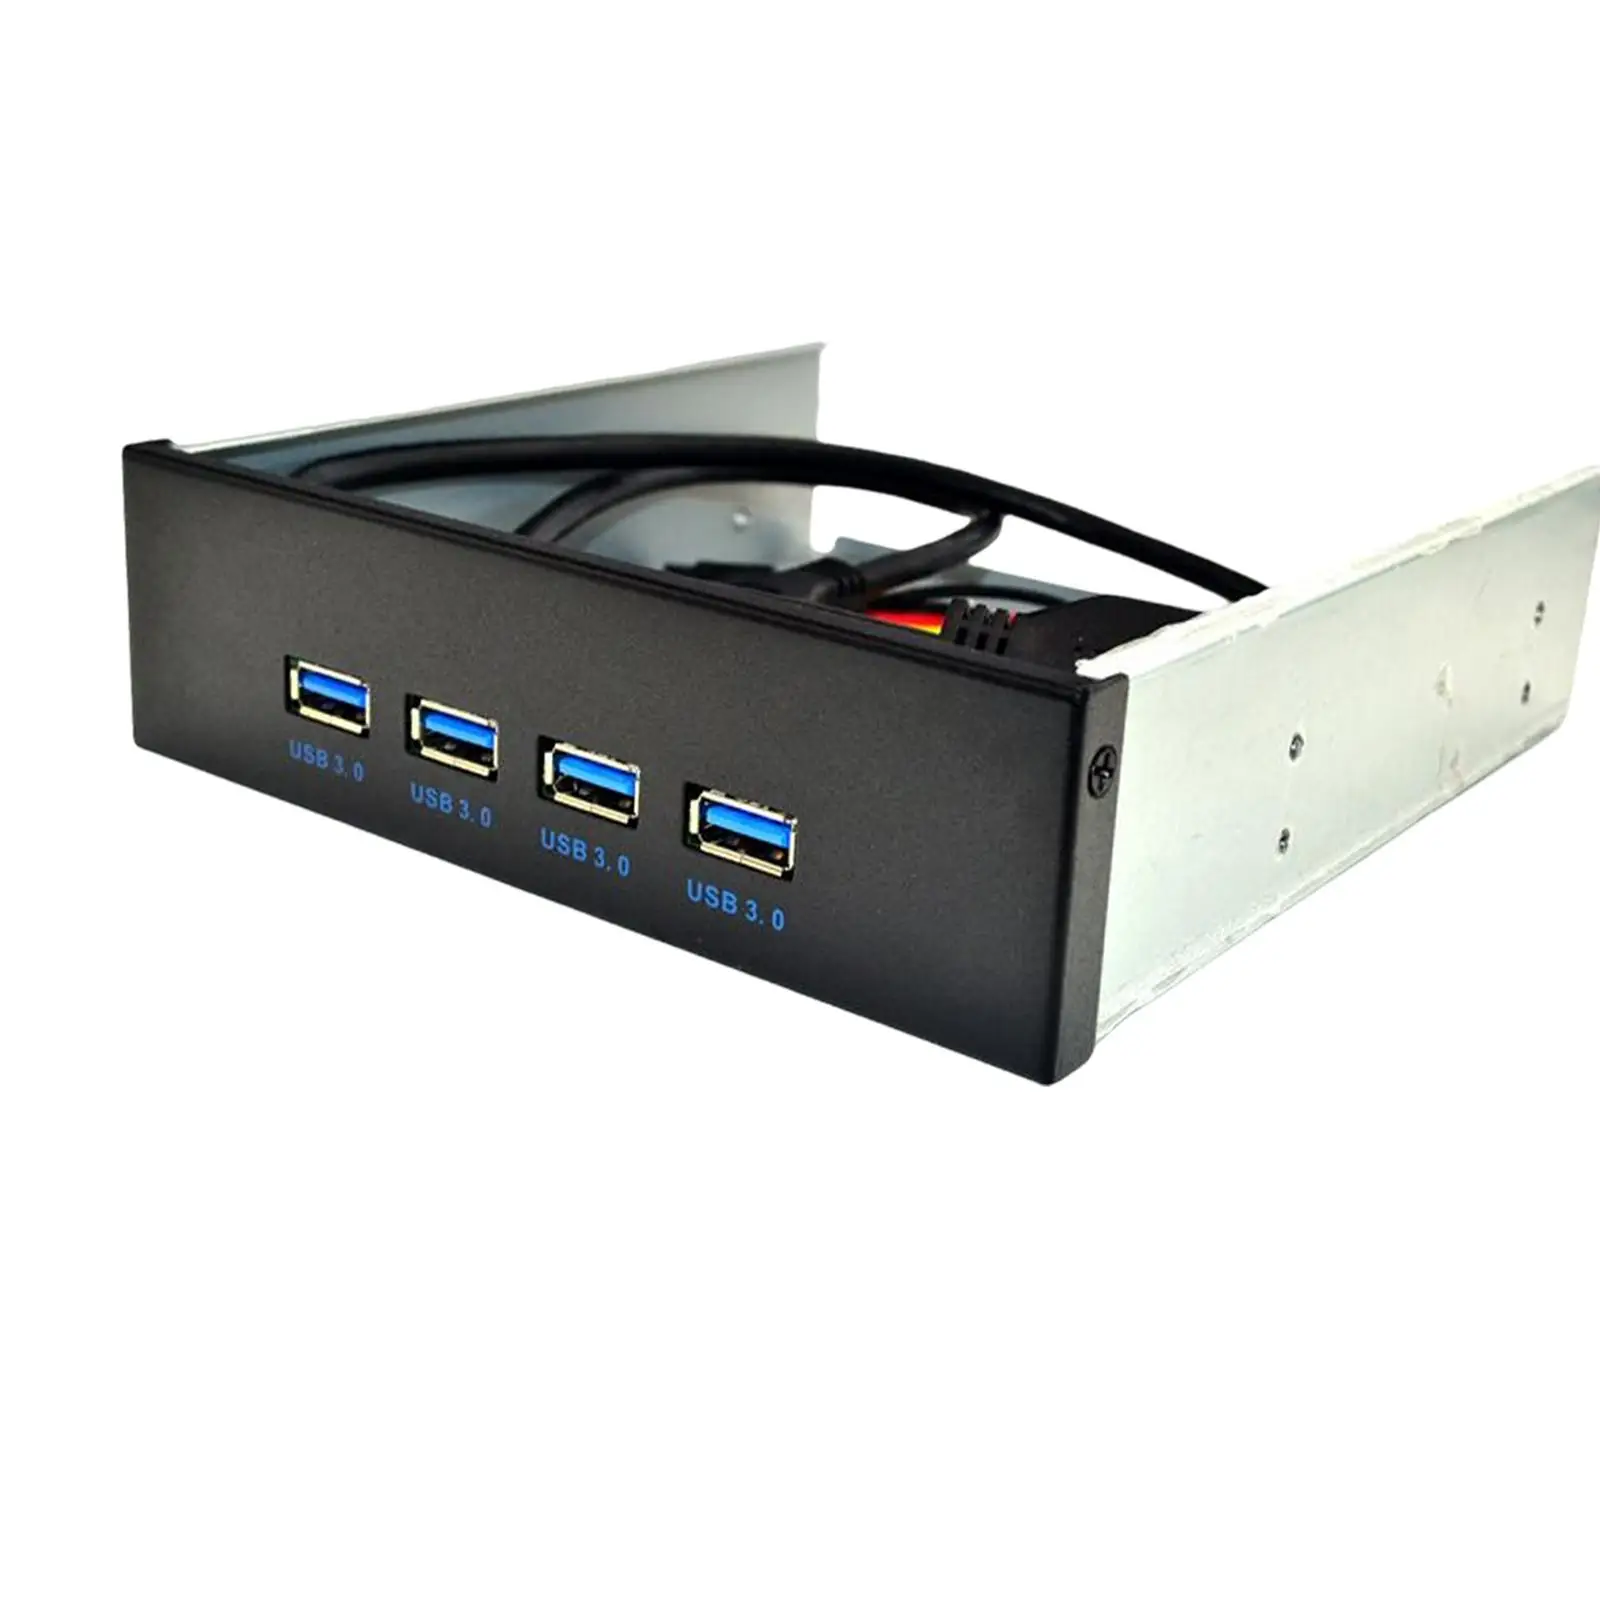 5.25 inch Optical Drive Front Panel 4 Ports USB 3.0 High Speed USB 3.0 Hub for PC